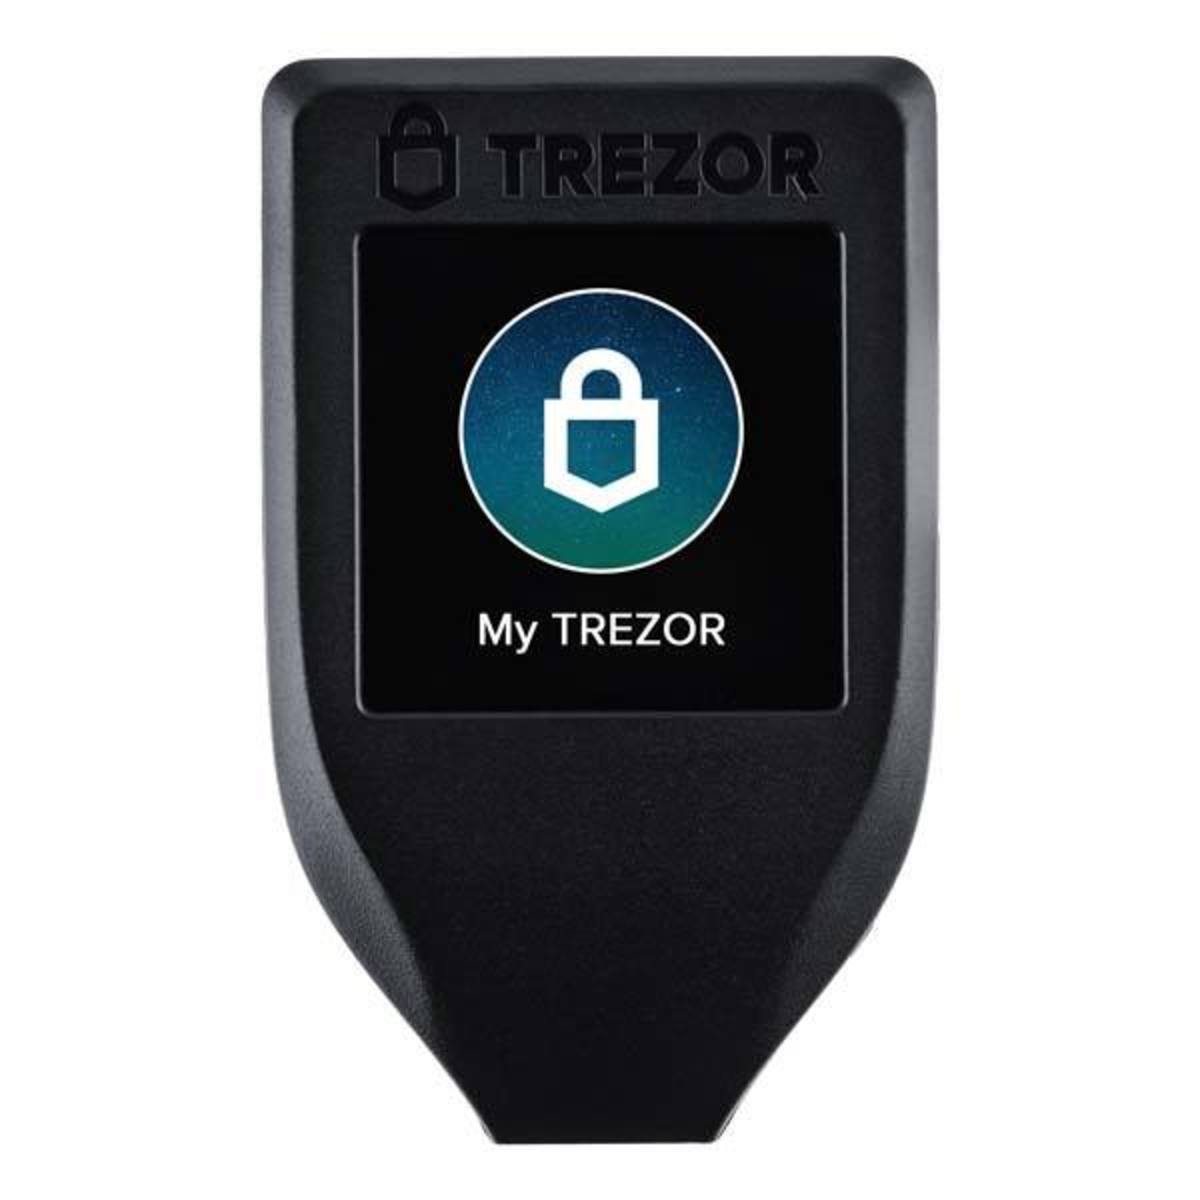 Trezor hardware wallets are among the most popular bitcoin wallet options.